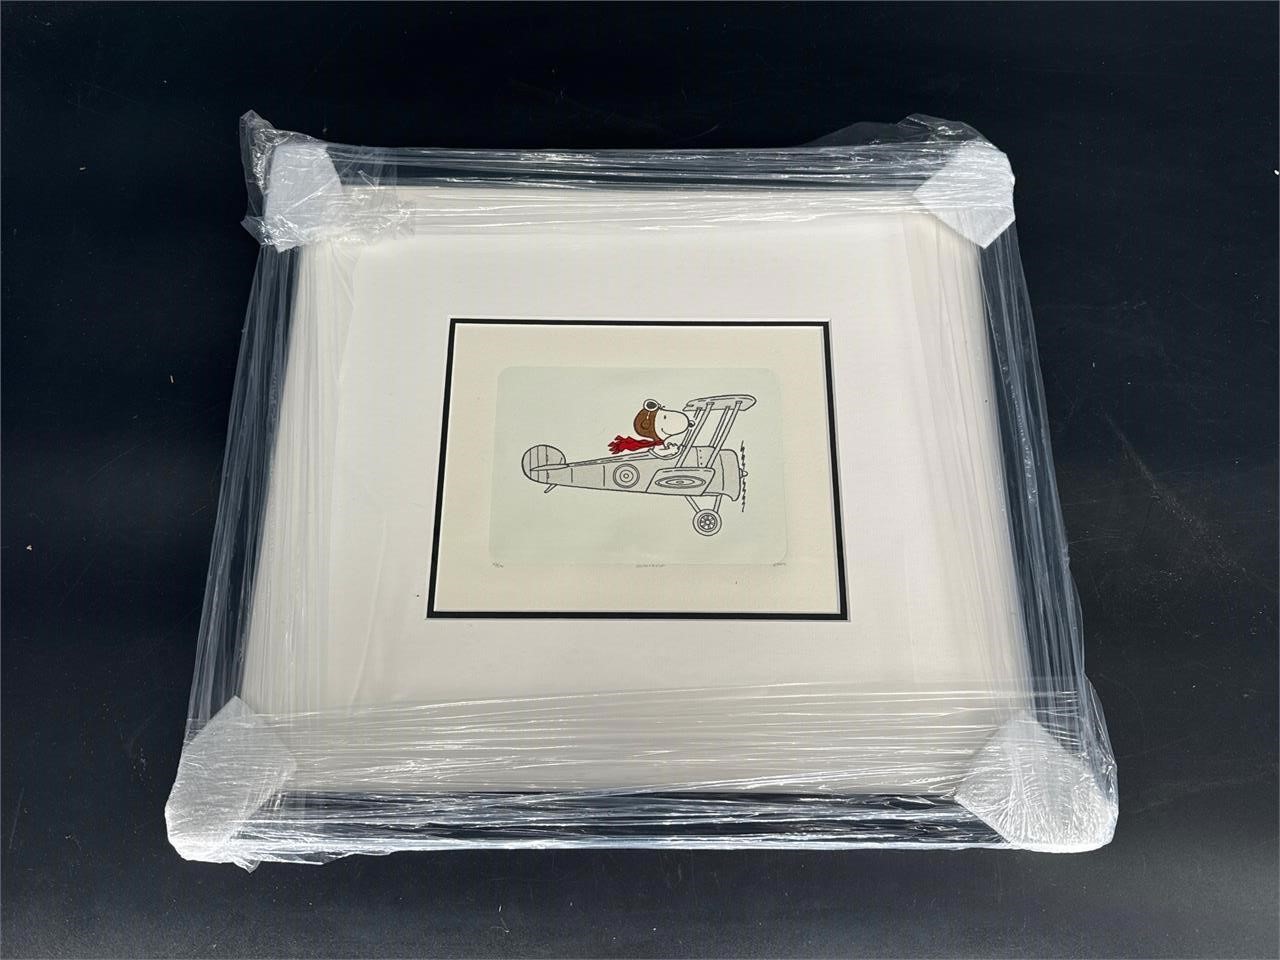 "FLYING HIGH" SNOOPY ETCHING #19/500 W/COA